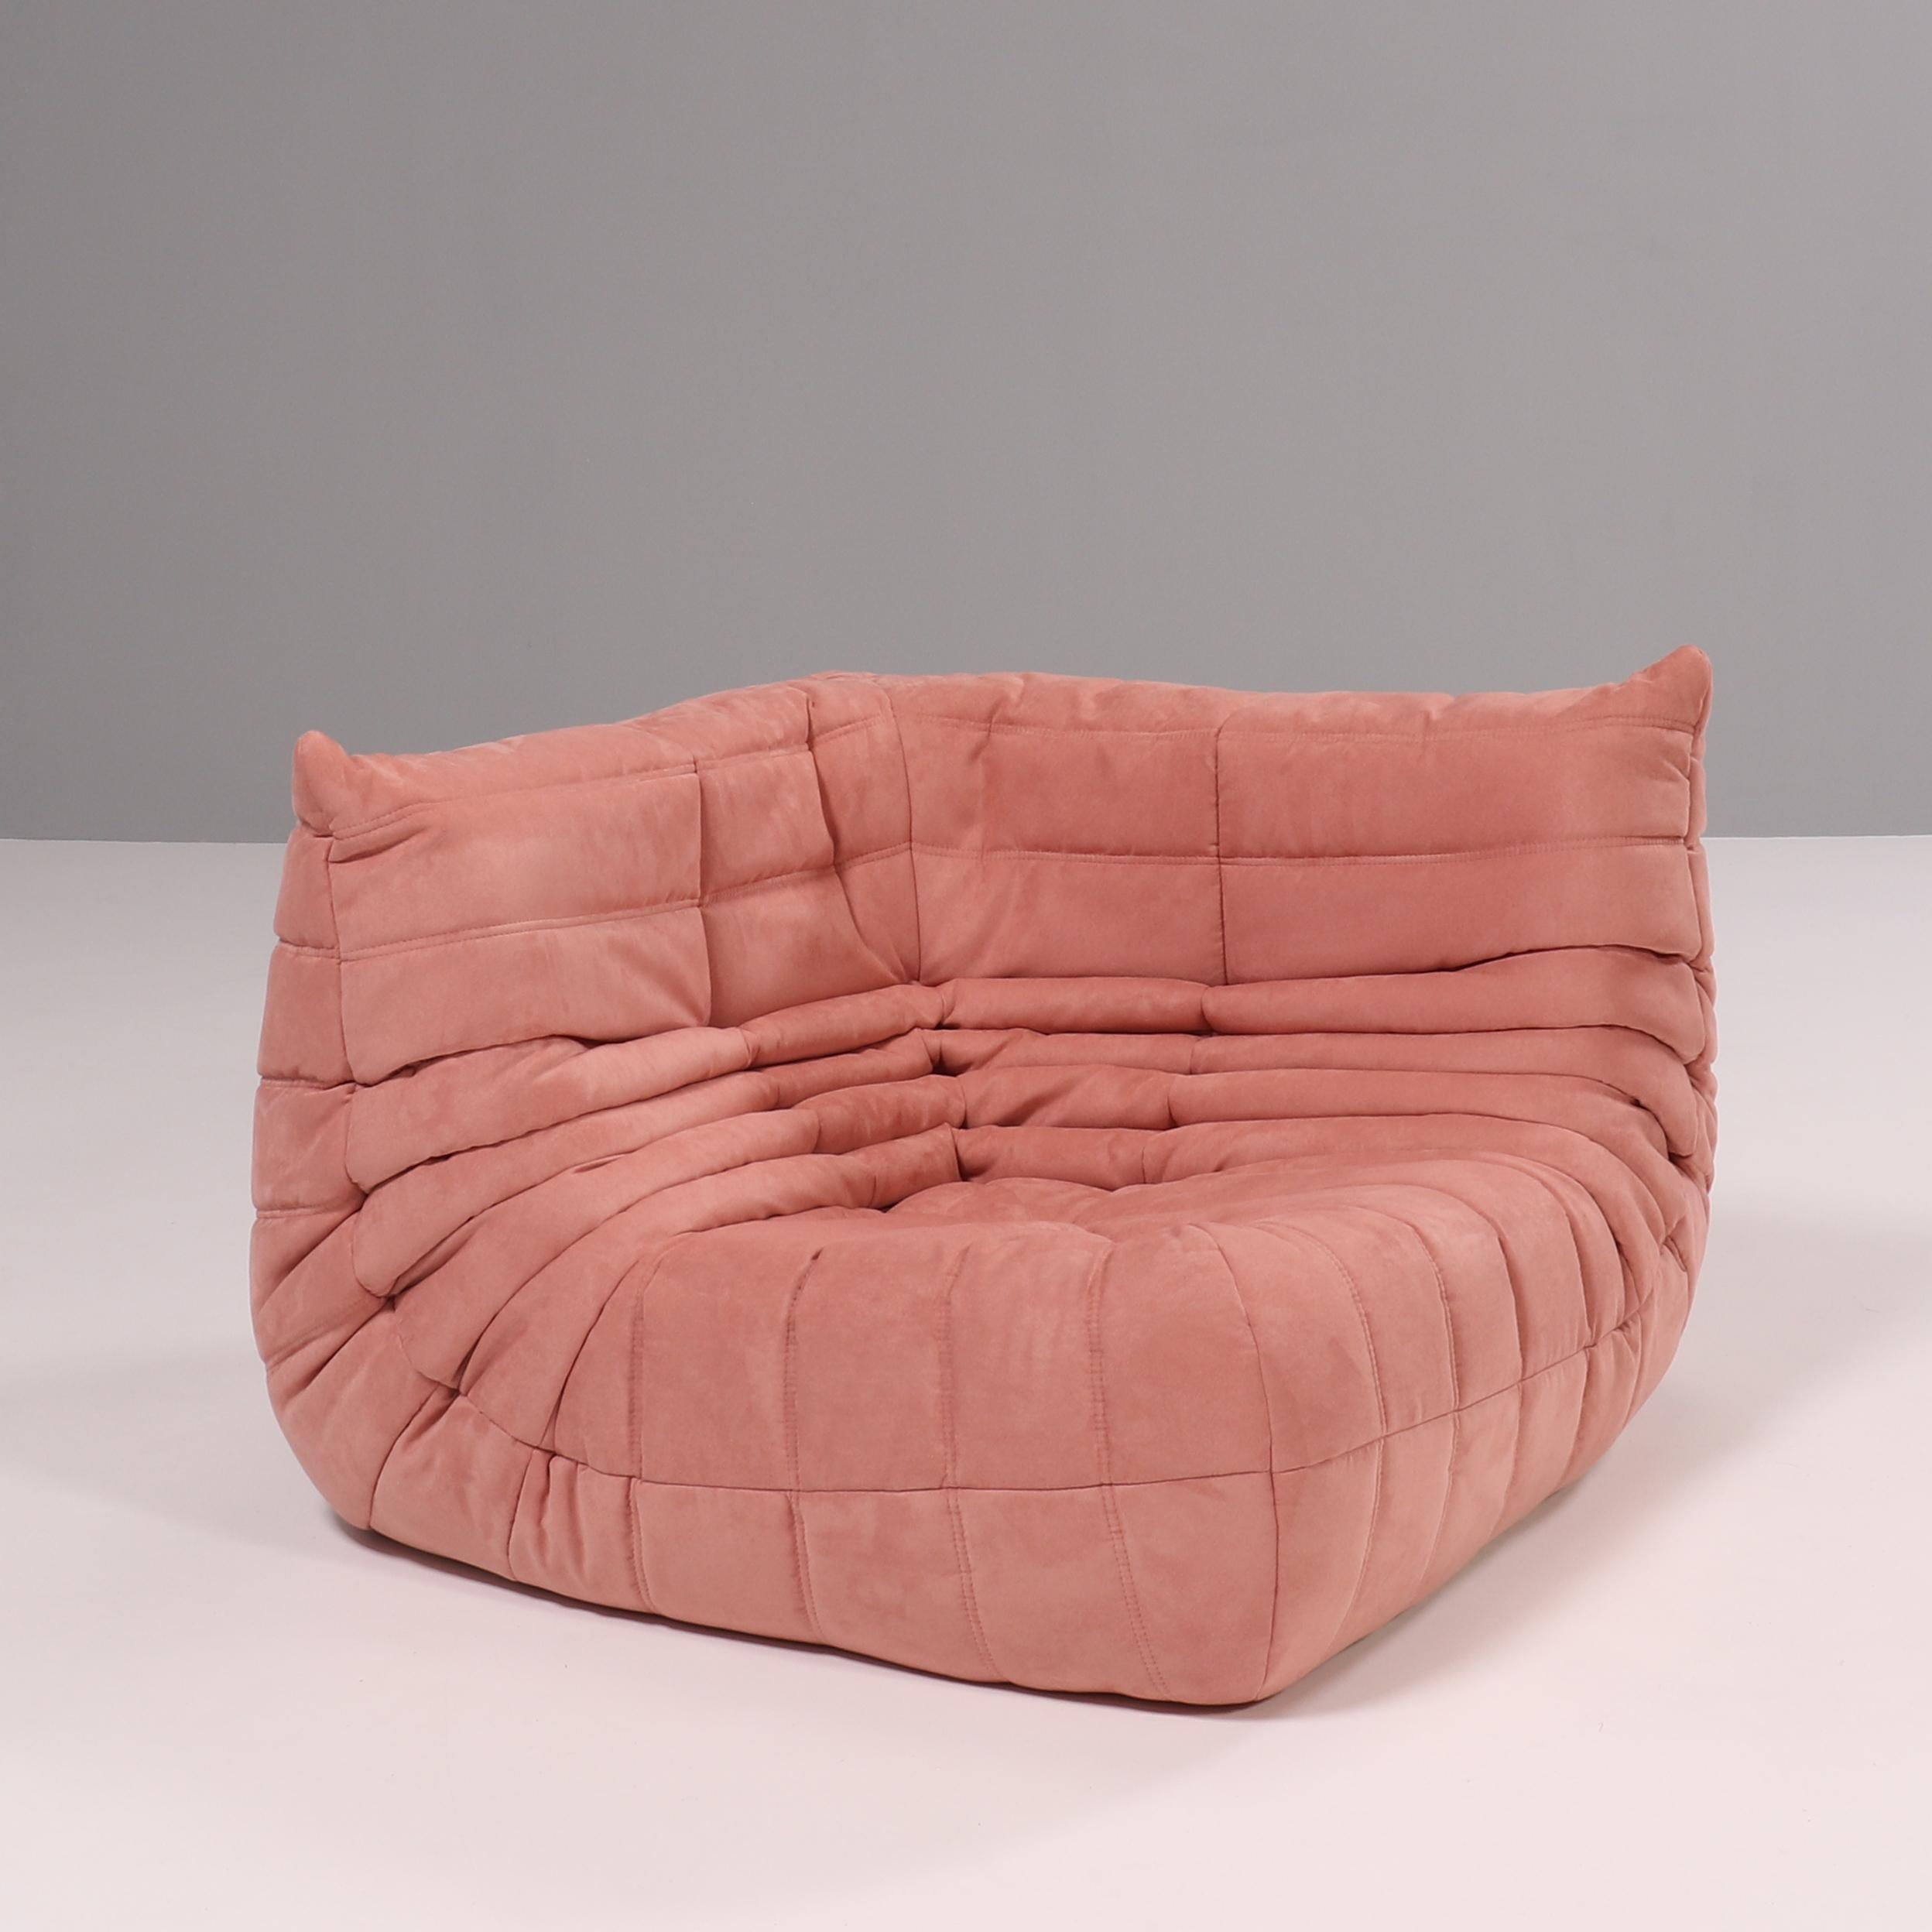 Fabric Ligne Roset by Michel Ducaroy Togo Pink Modular Sofa and Footstool, Set of 4